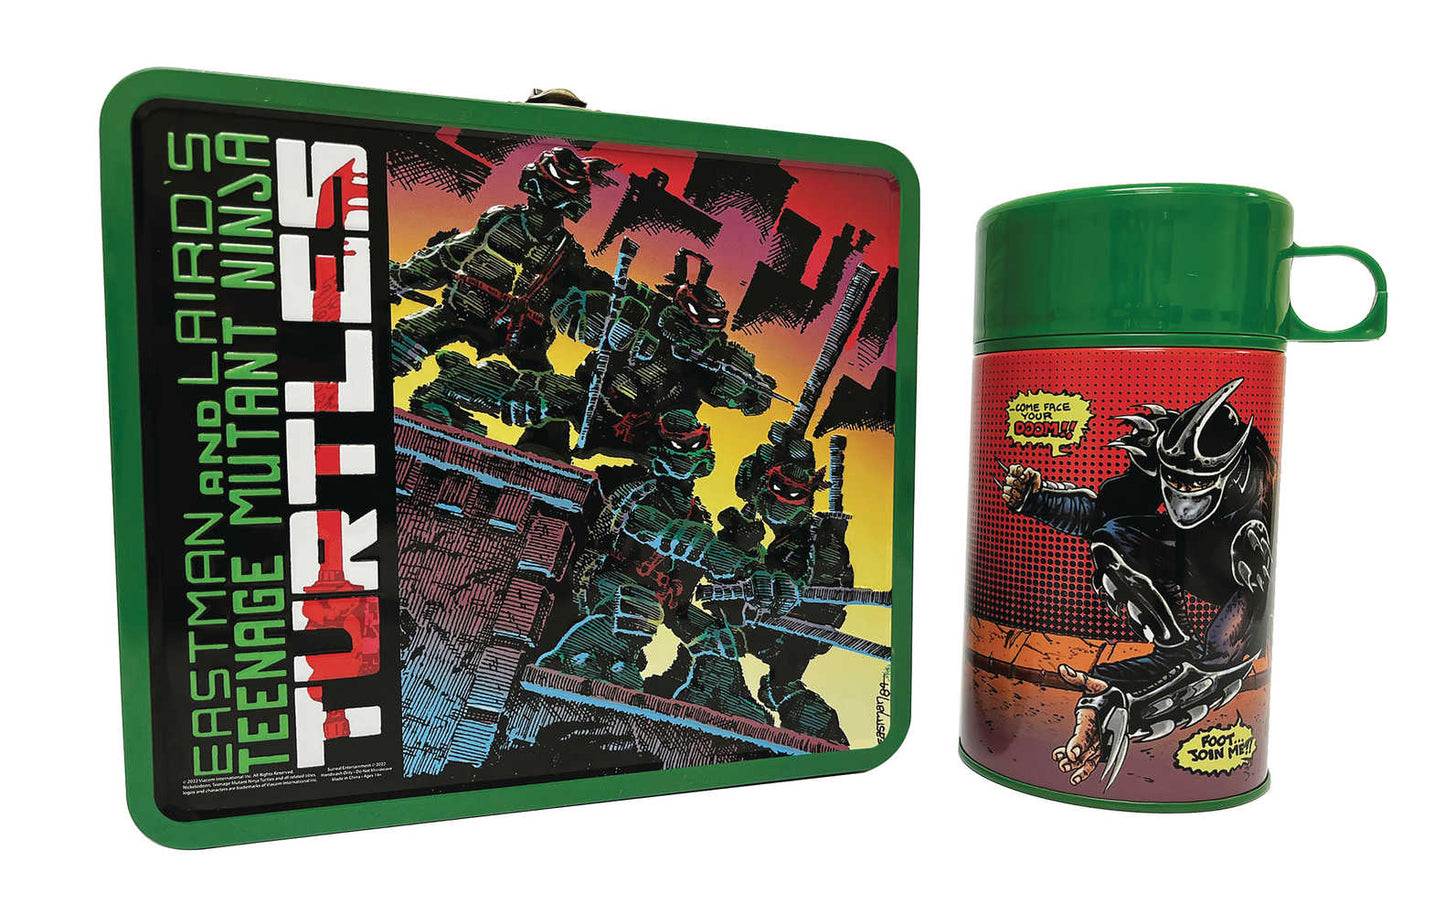 Tin Titans Teenage Mutant Ninja Turtles Classic Comic #1 Previews Exclusive Lunchbox & Bev Container